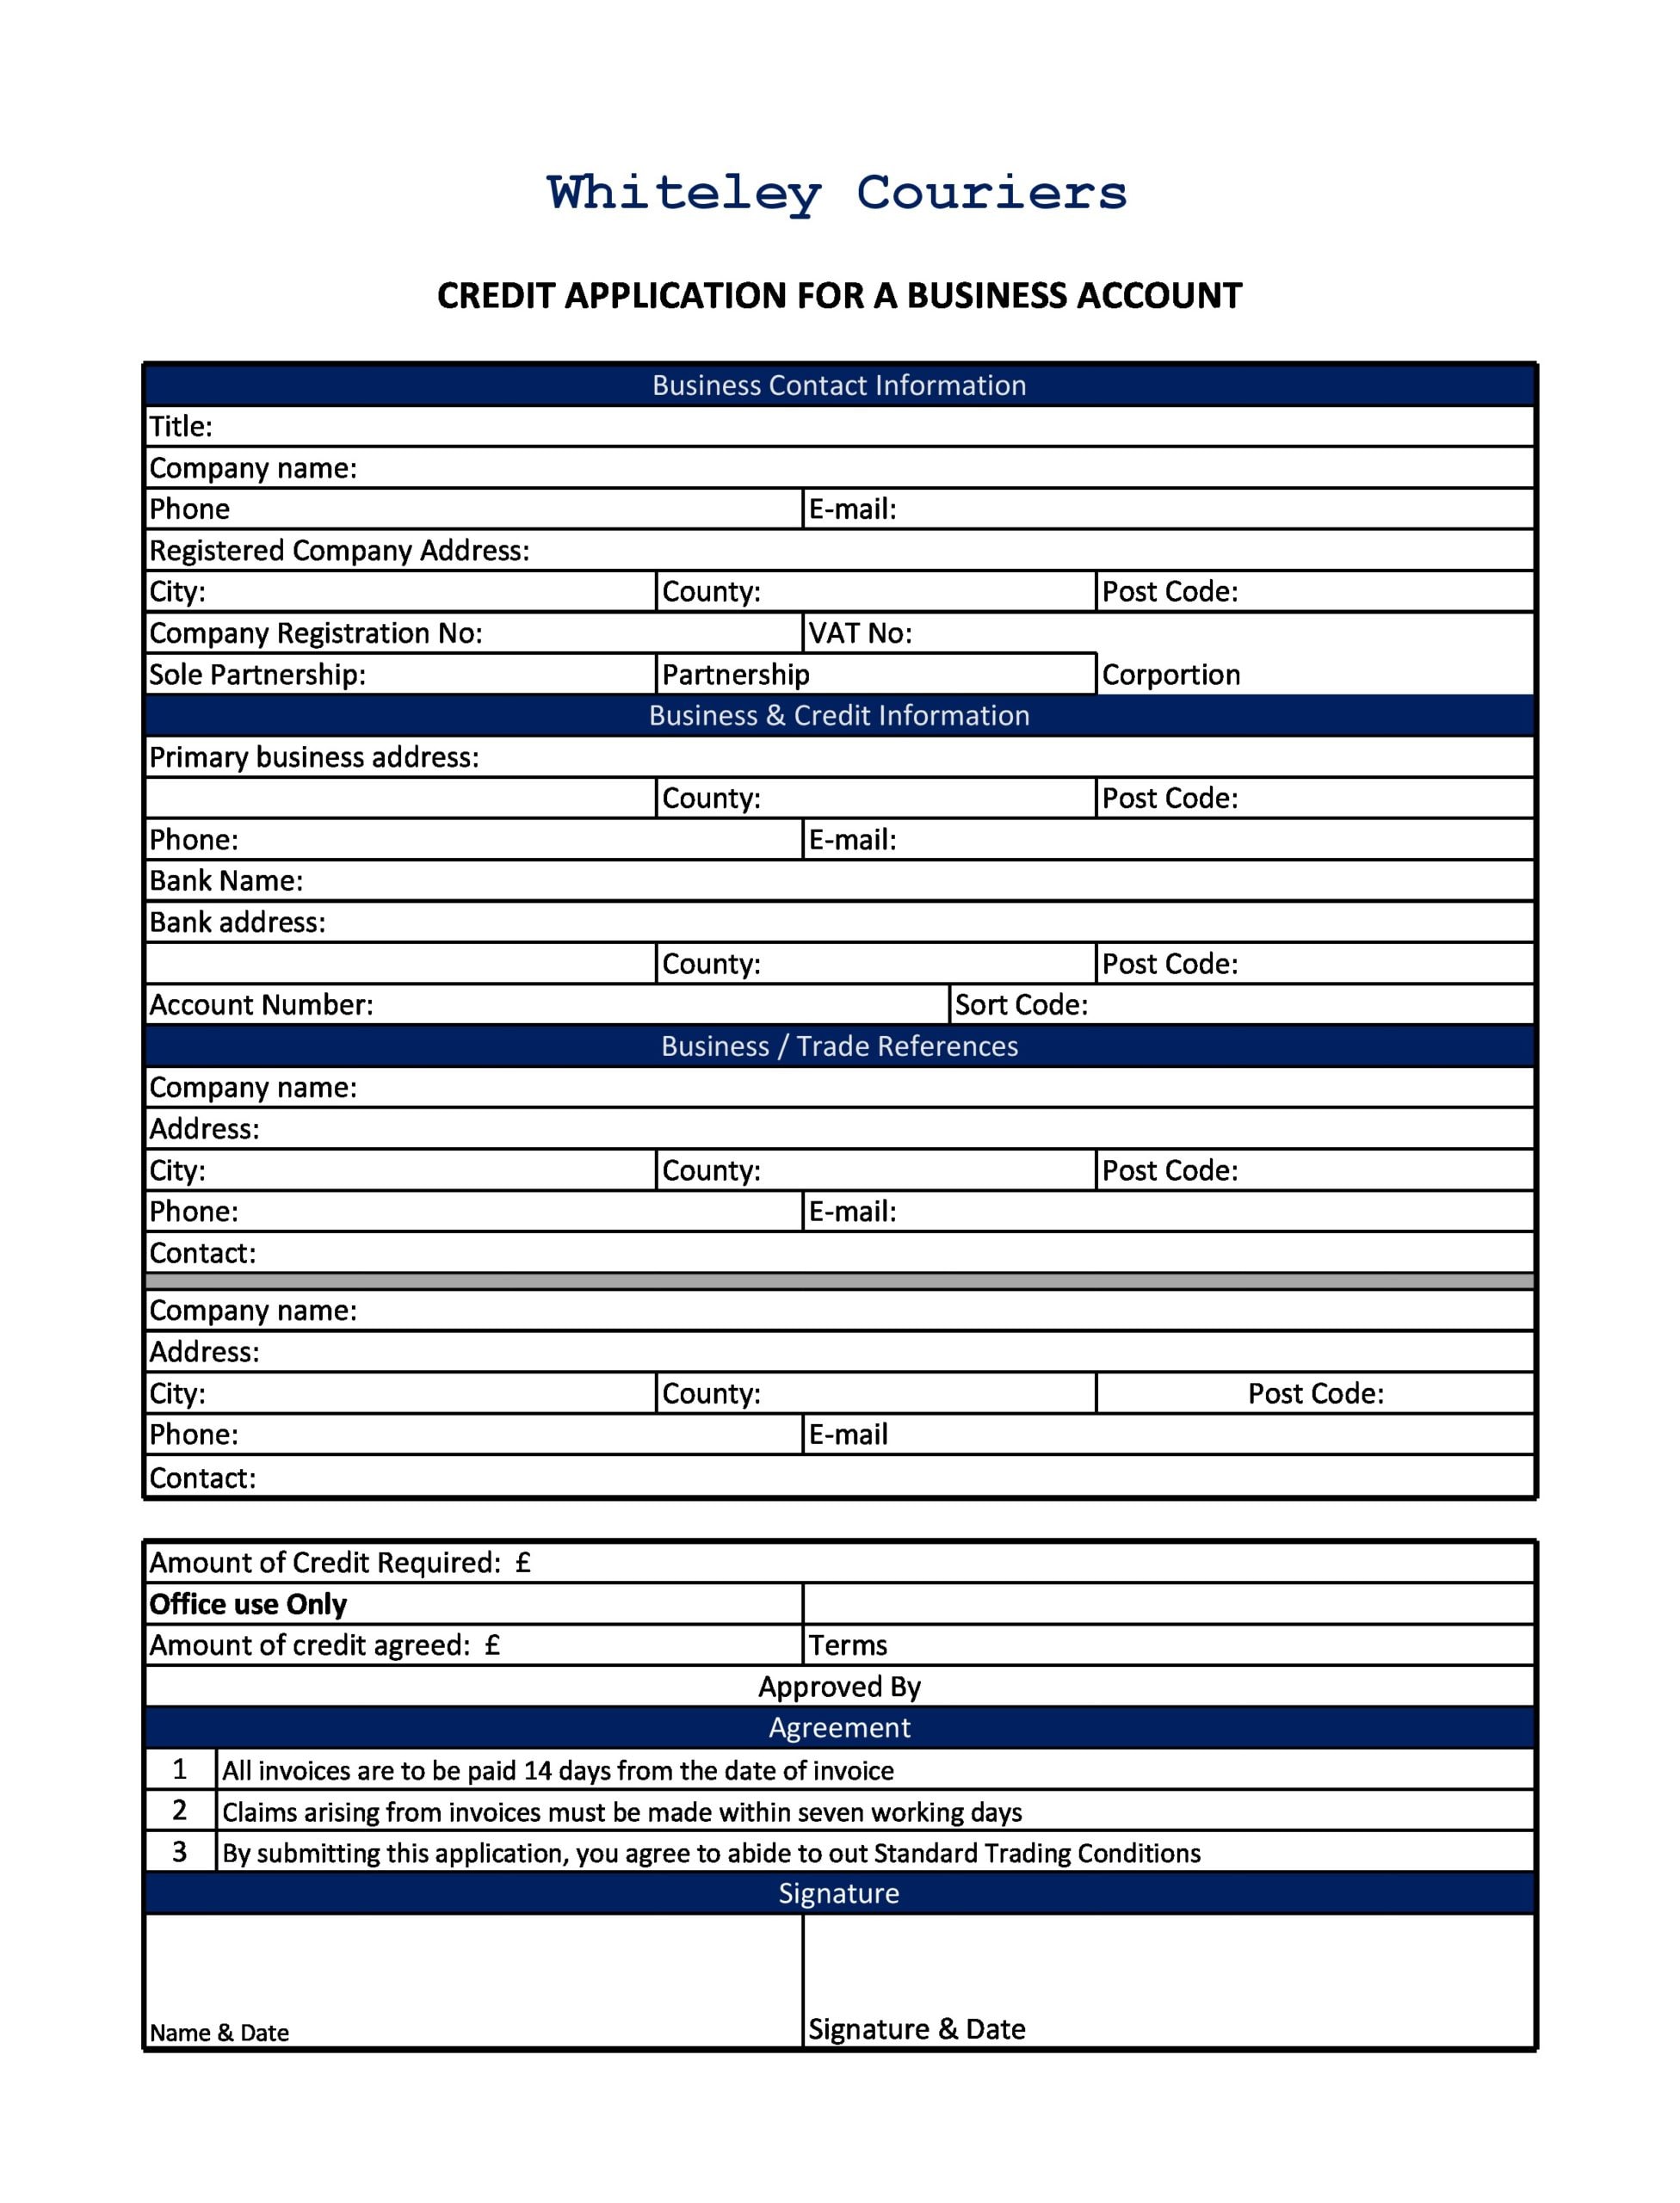 23 Free Credit Application Templates (Business & Generic) Inside credit application and agreement template